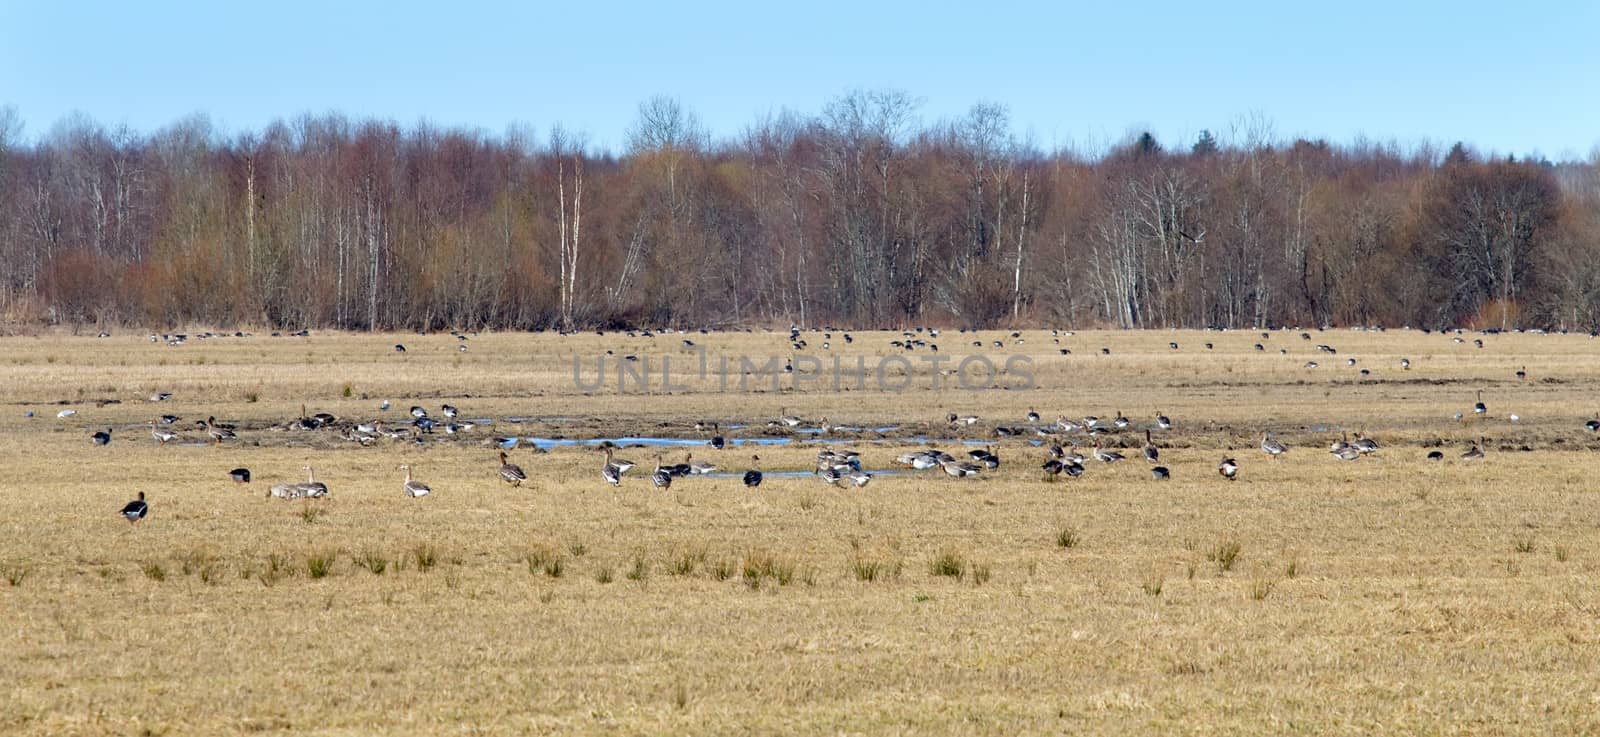 spring congestions of geese on fields during migration